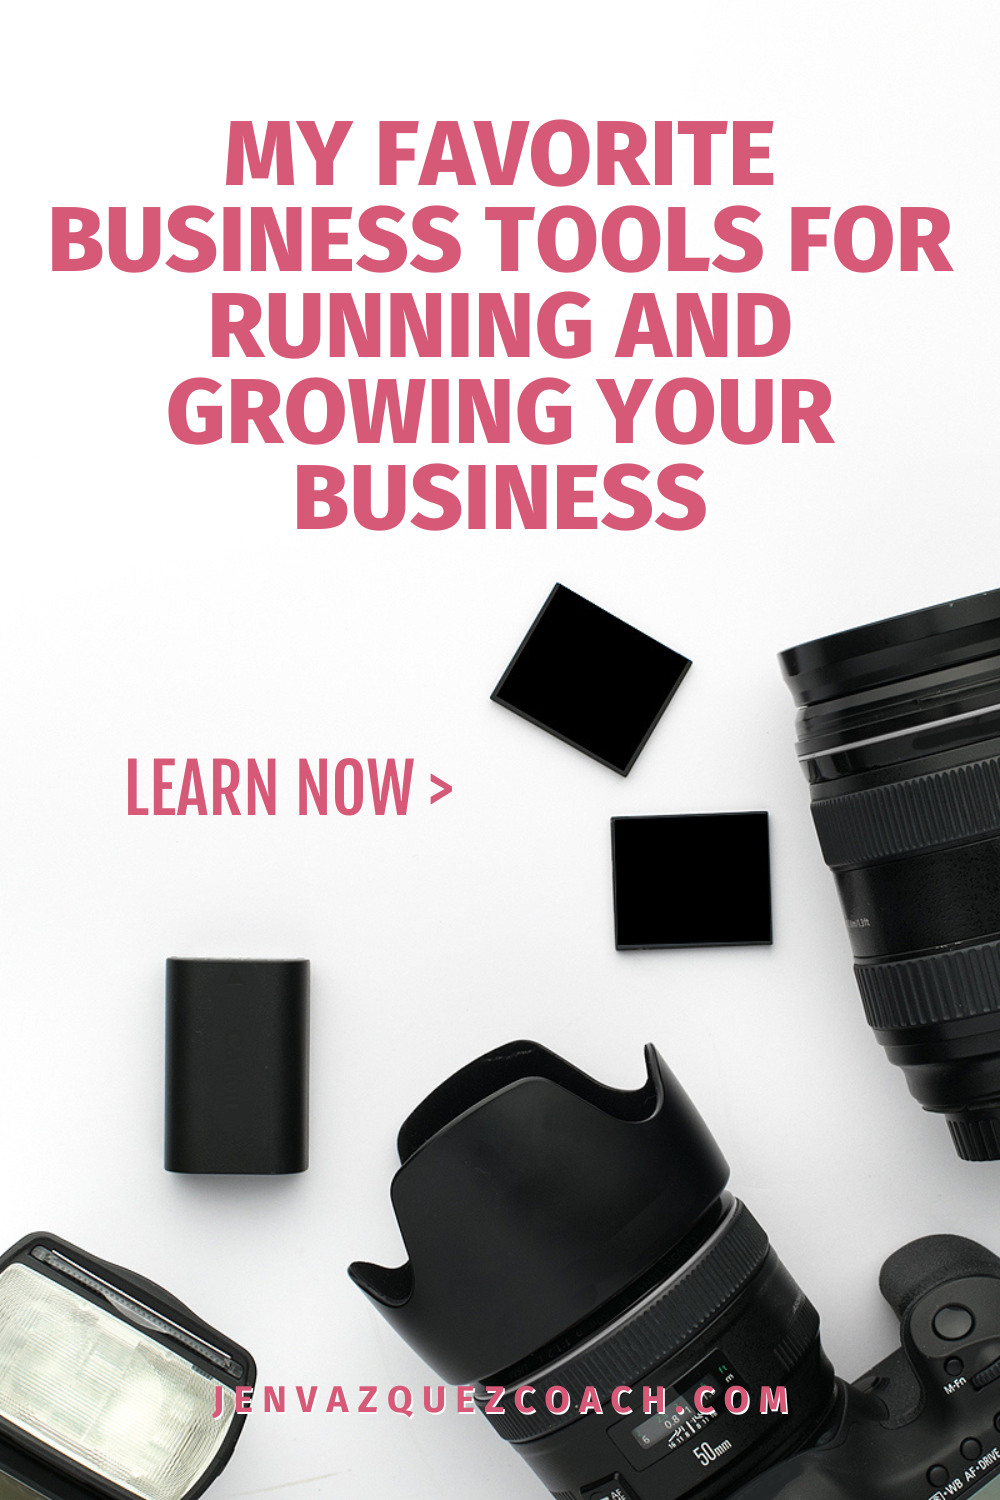 My Favorite Business Tools for Running and Growing Your Business